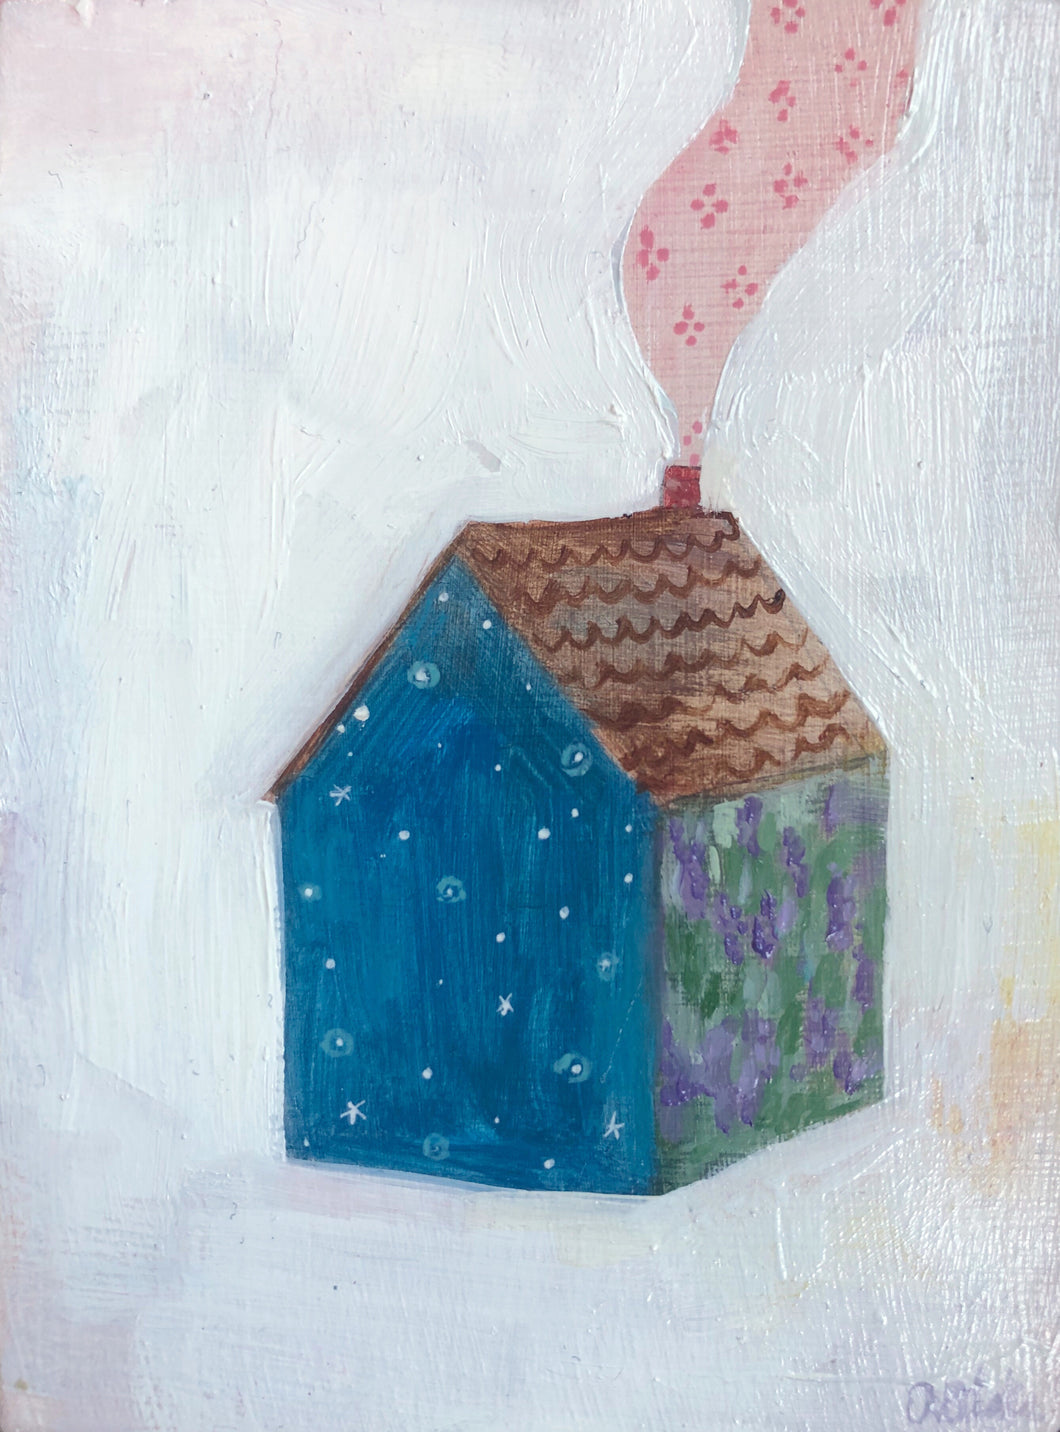 A home made of starlight and lavender